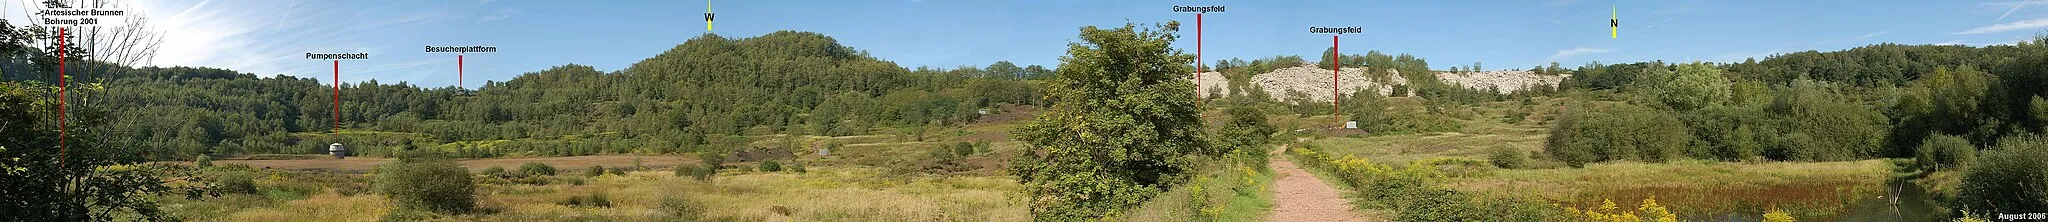 Photo showing: Panoramic photo taken inside Grube Messel fossil site, near Darmstadt, Germany, looking SSW via NW to NE